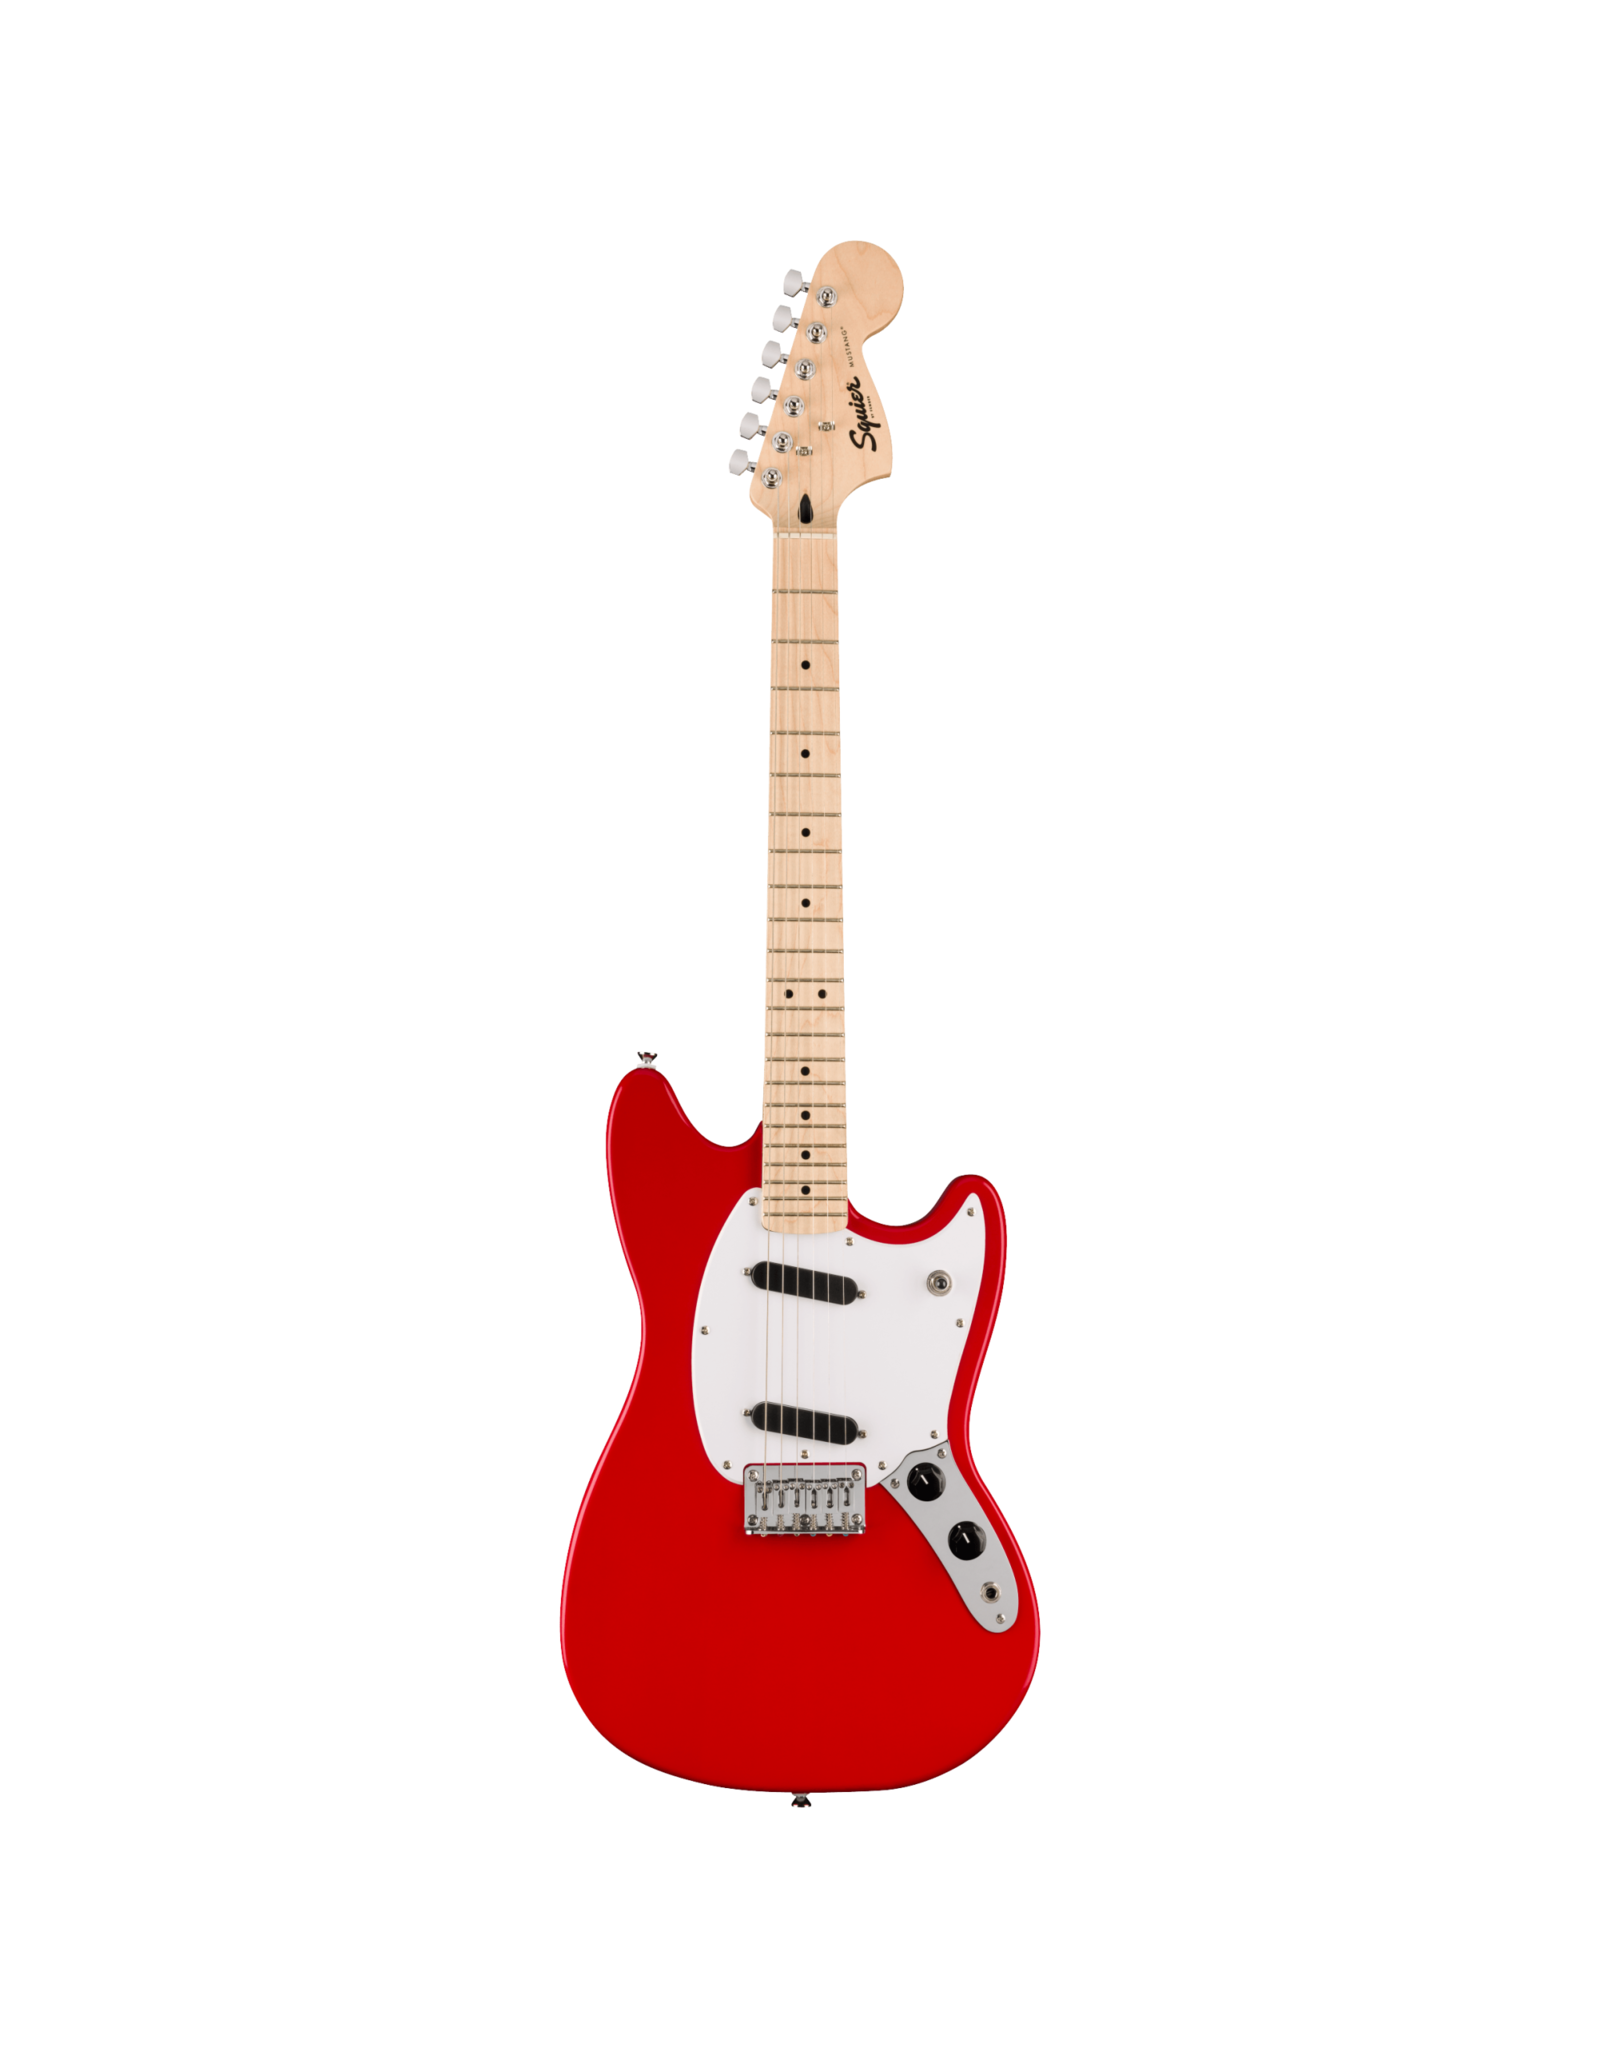 Squier Squier Sonic Mustang, White Pickguard, Torino Red